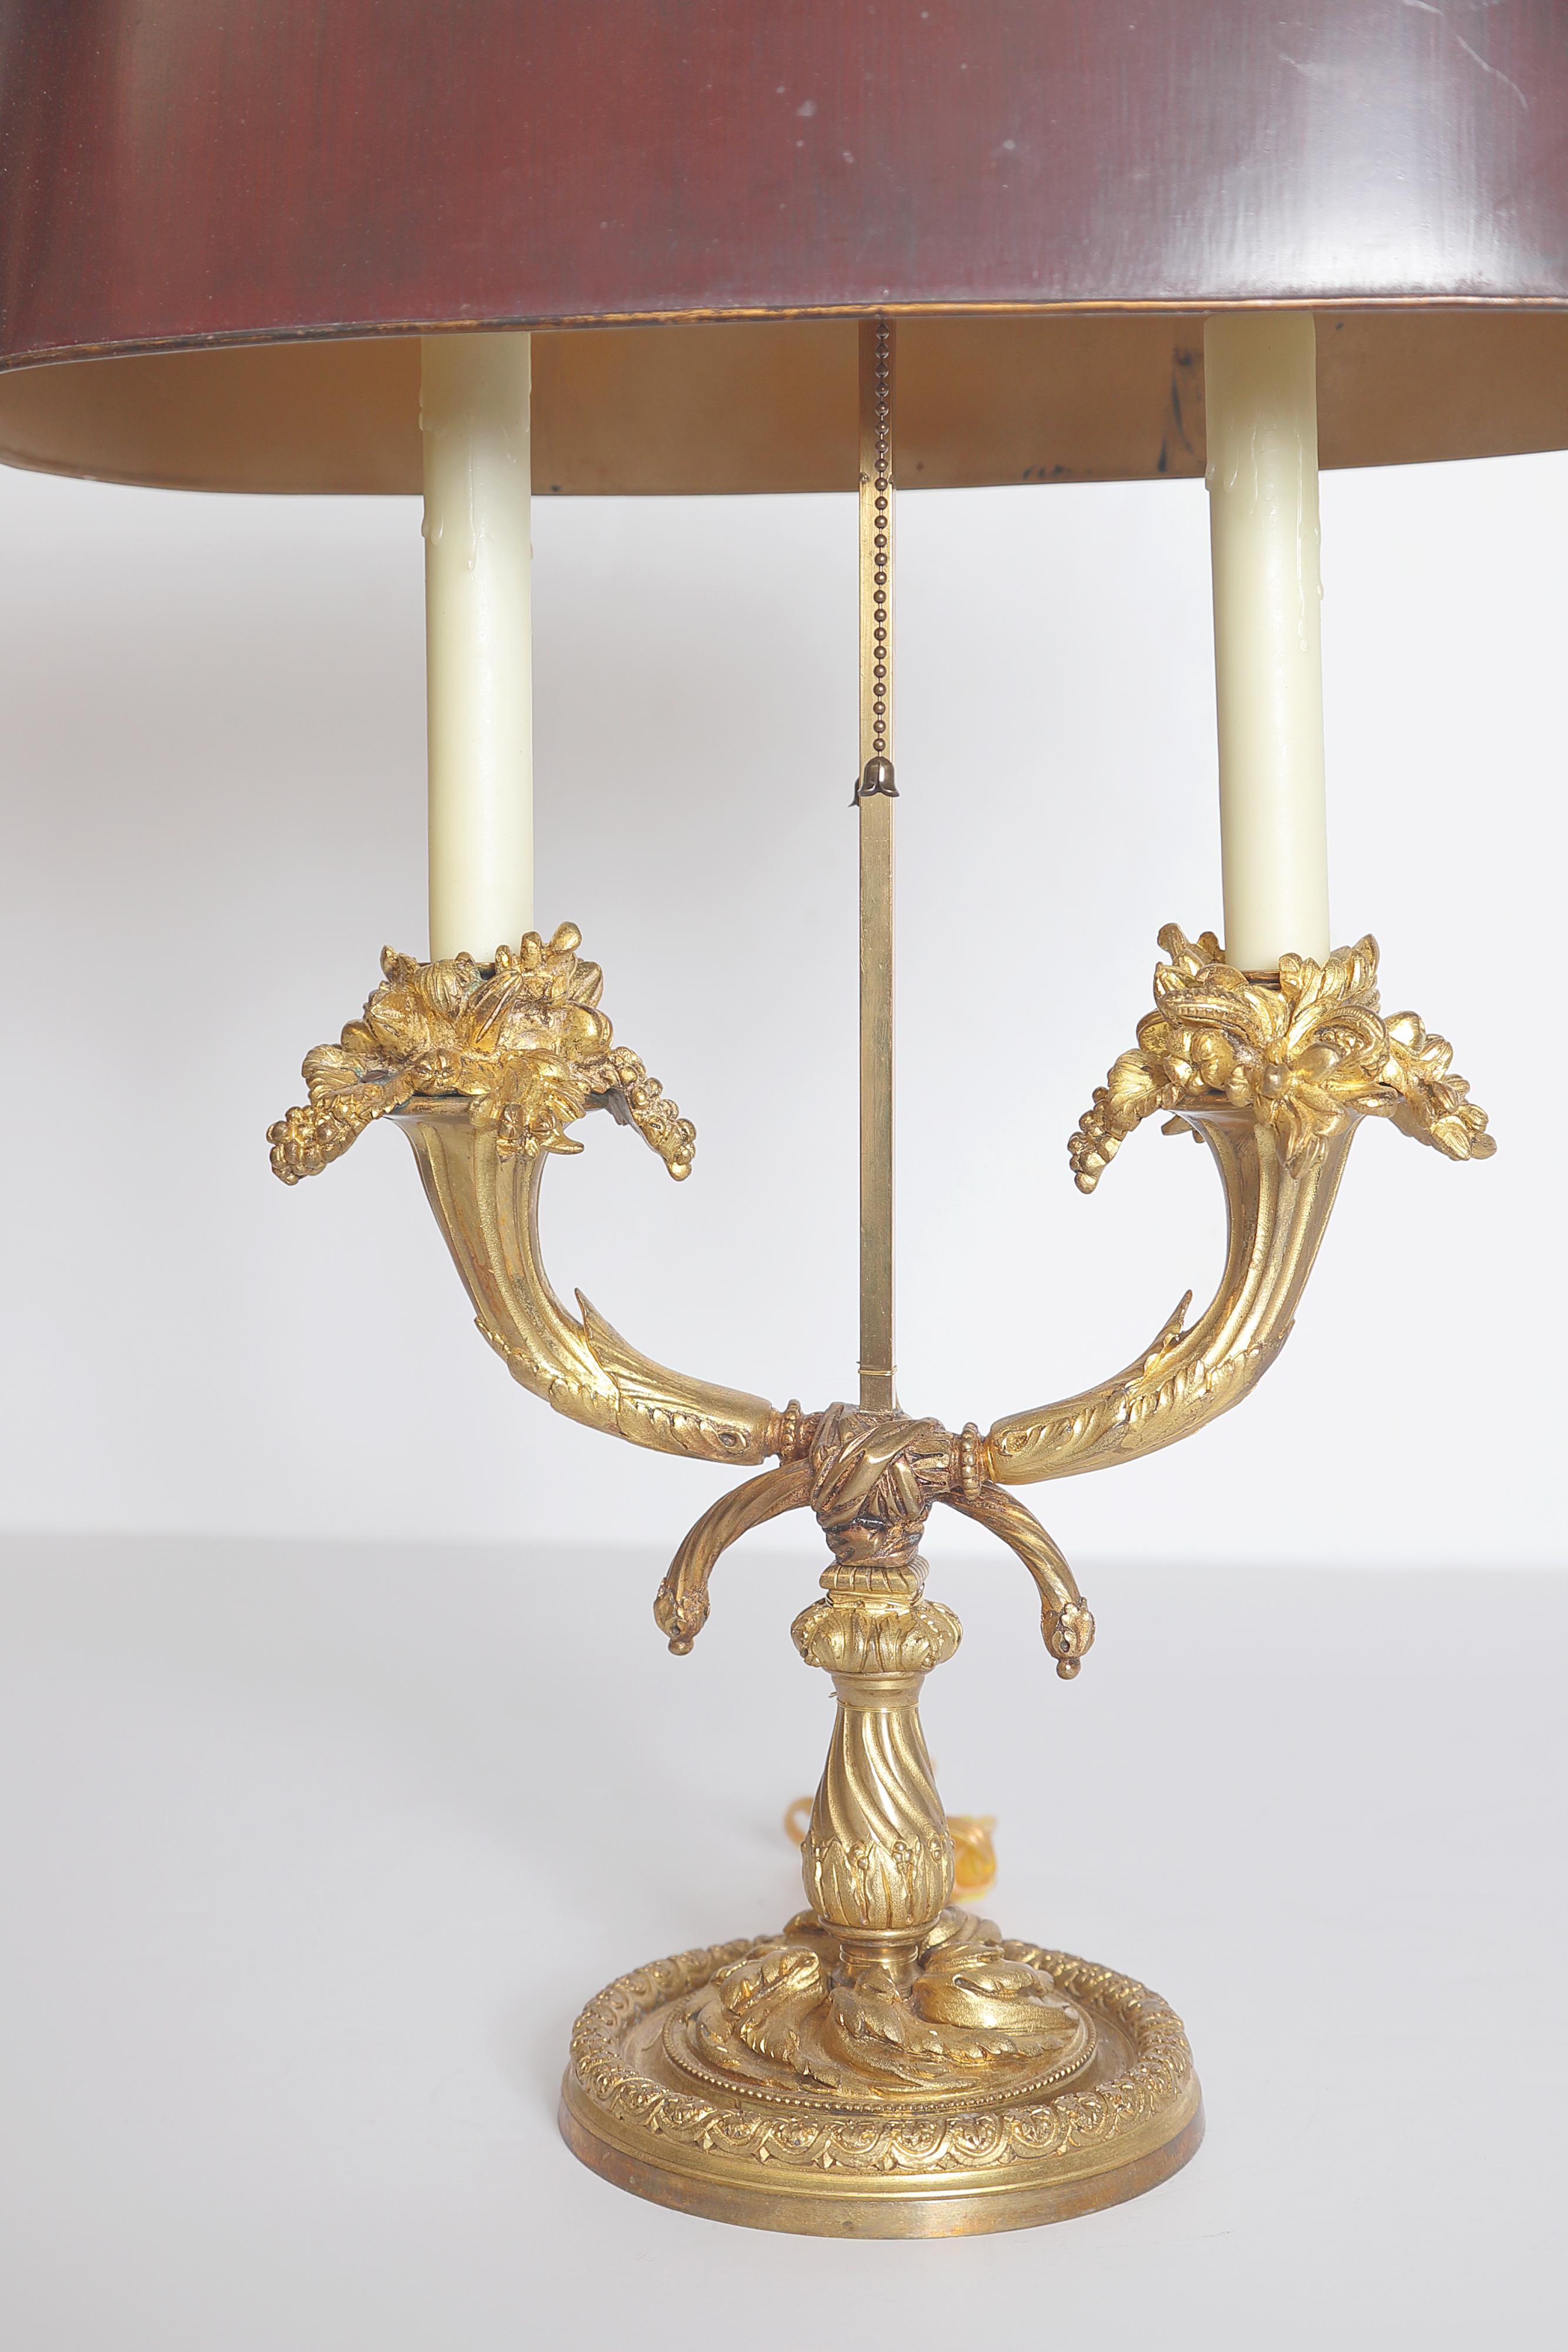 A 19th century Louis XVI style ormolu bouillotte lamp with red tole shade, the shade over two foliated arms rising on a circular base with beading and floral molding. Second half of the 19th century. (Old repairs).